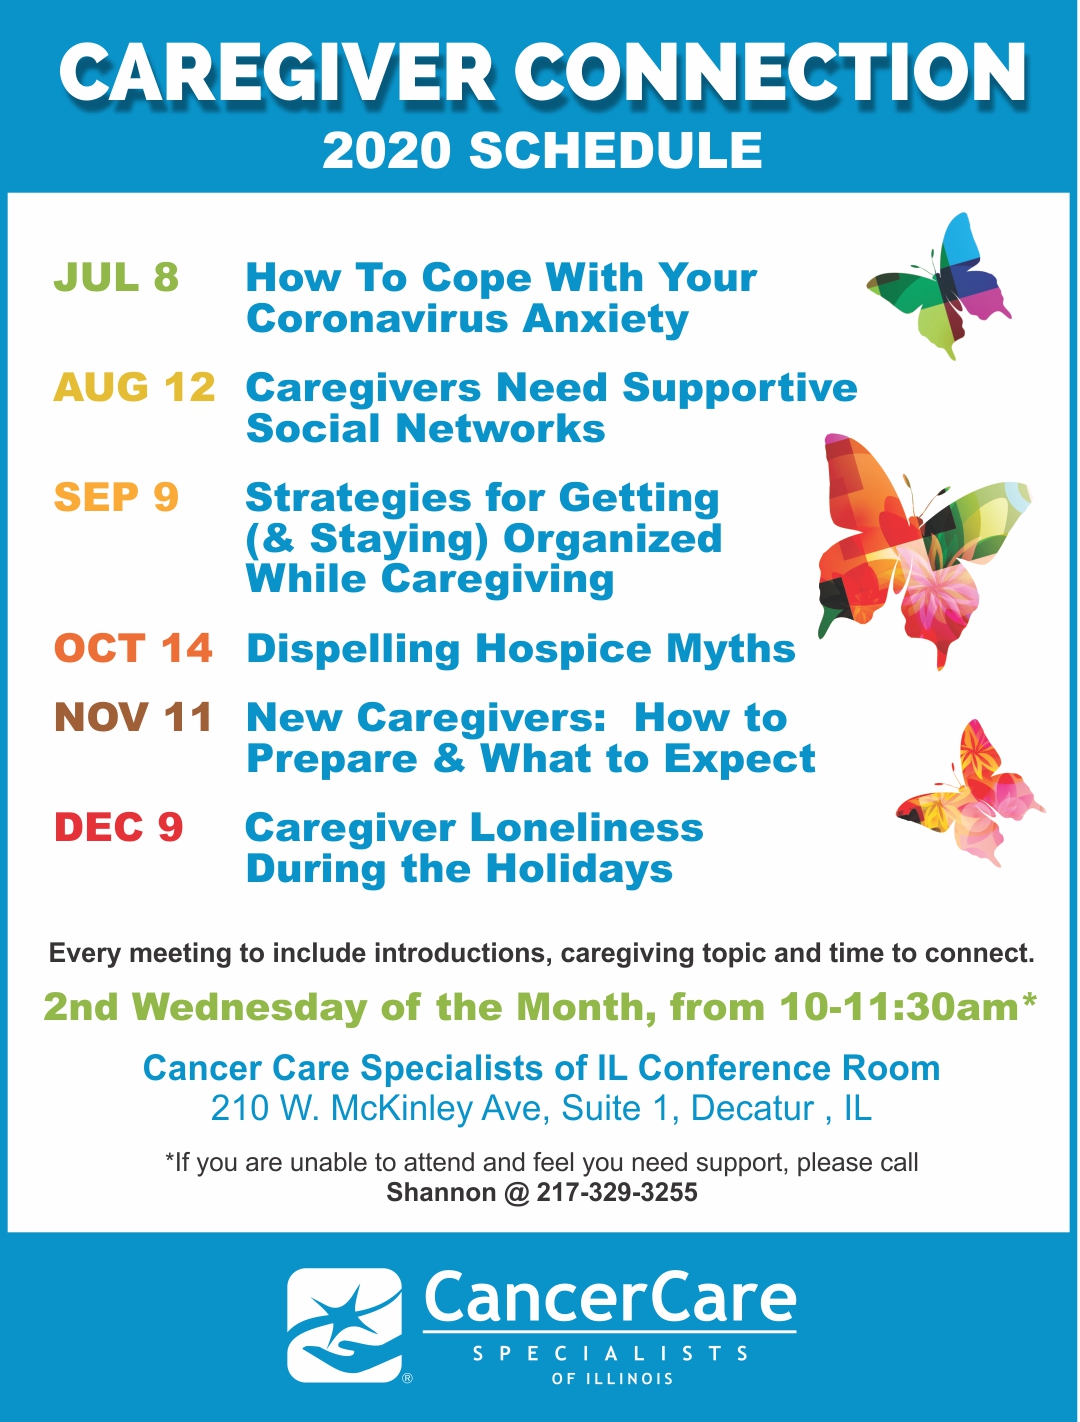 Caregiver Connection Flyer 6 24 20 Cancer Care Specialists of IL